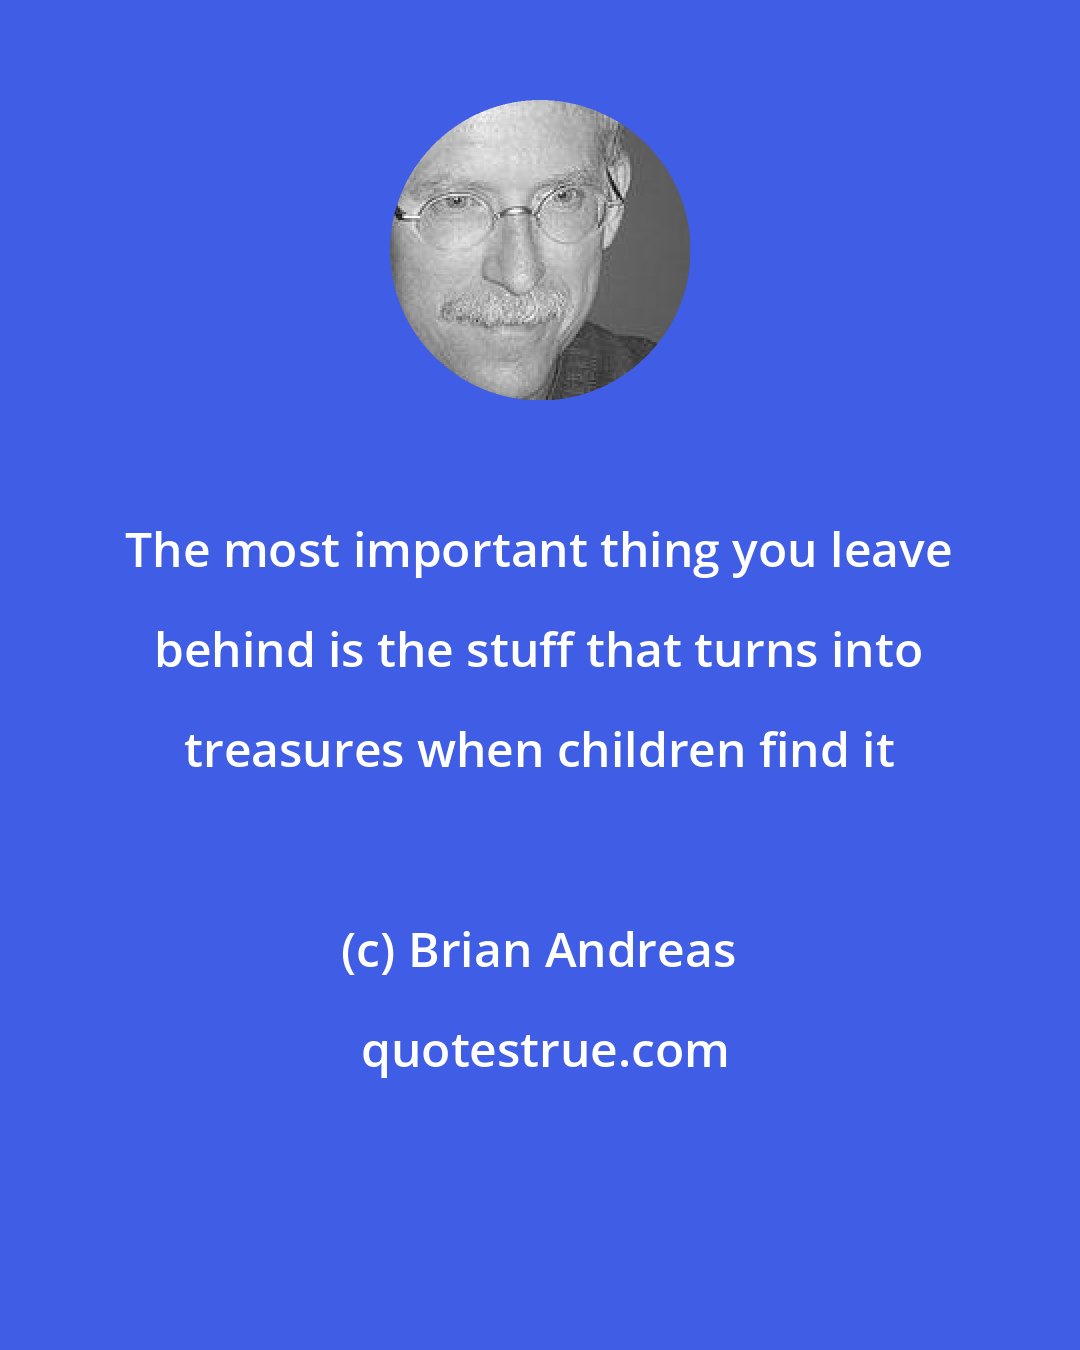 Brian Andreas: The most important thing you leave behind is the stuff that turns into treasures when children find it